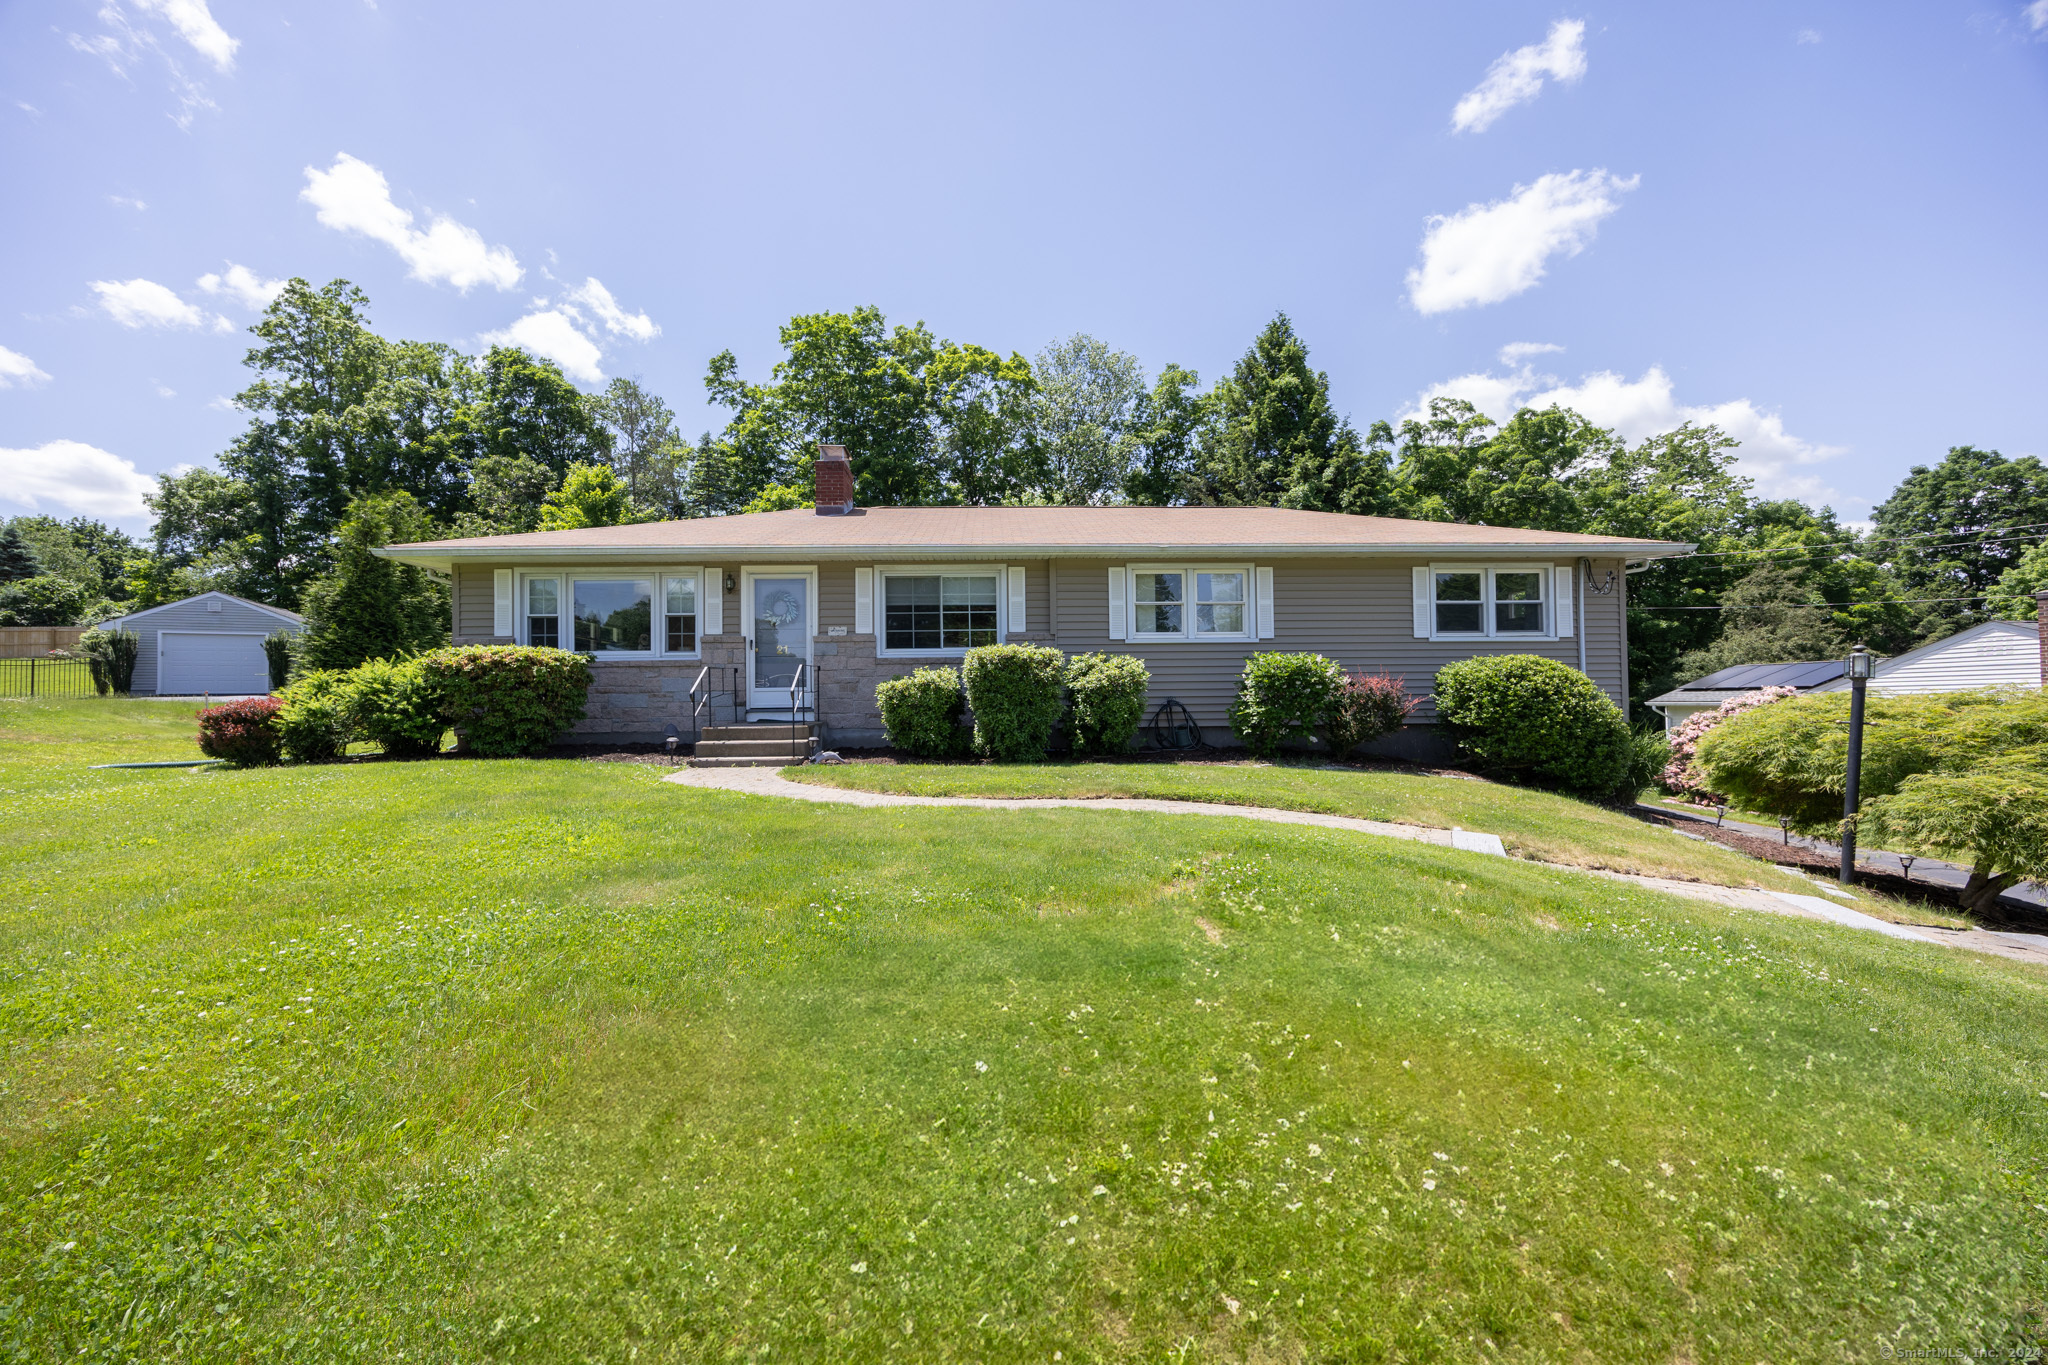 21 Amherst Drive, Cheshire, Connecticut - 3 Bedrooms  
2 Bathrooms  
8 Rooms - 